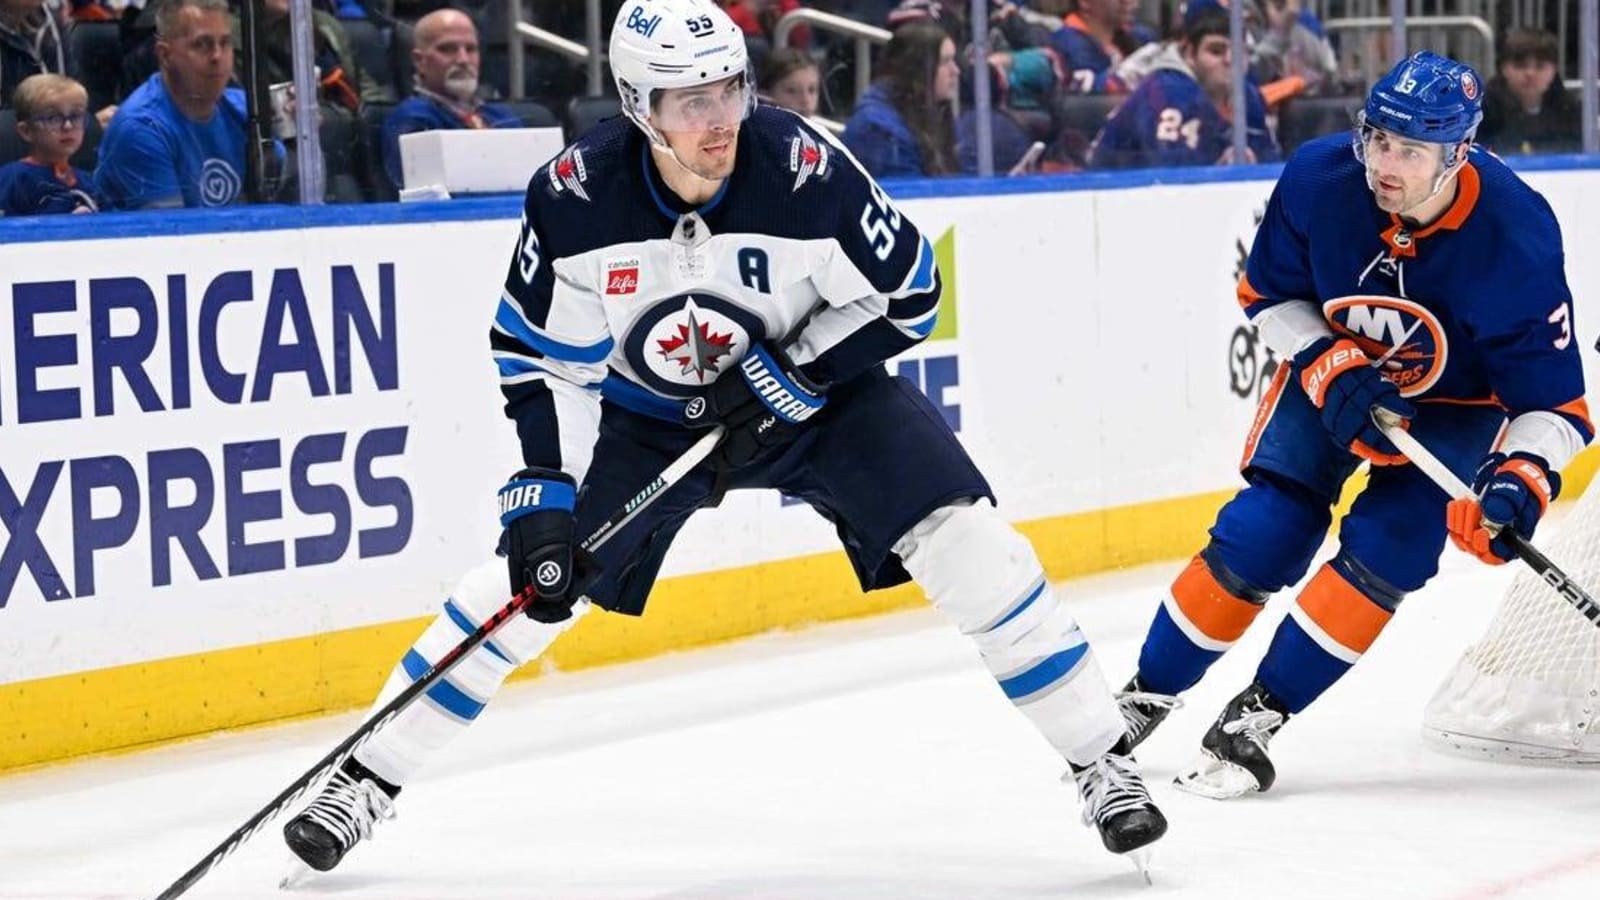 Jets aim to shake struggles in visit to streaking Capitals